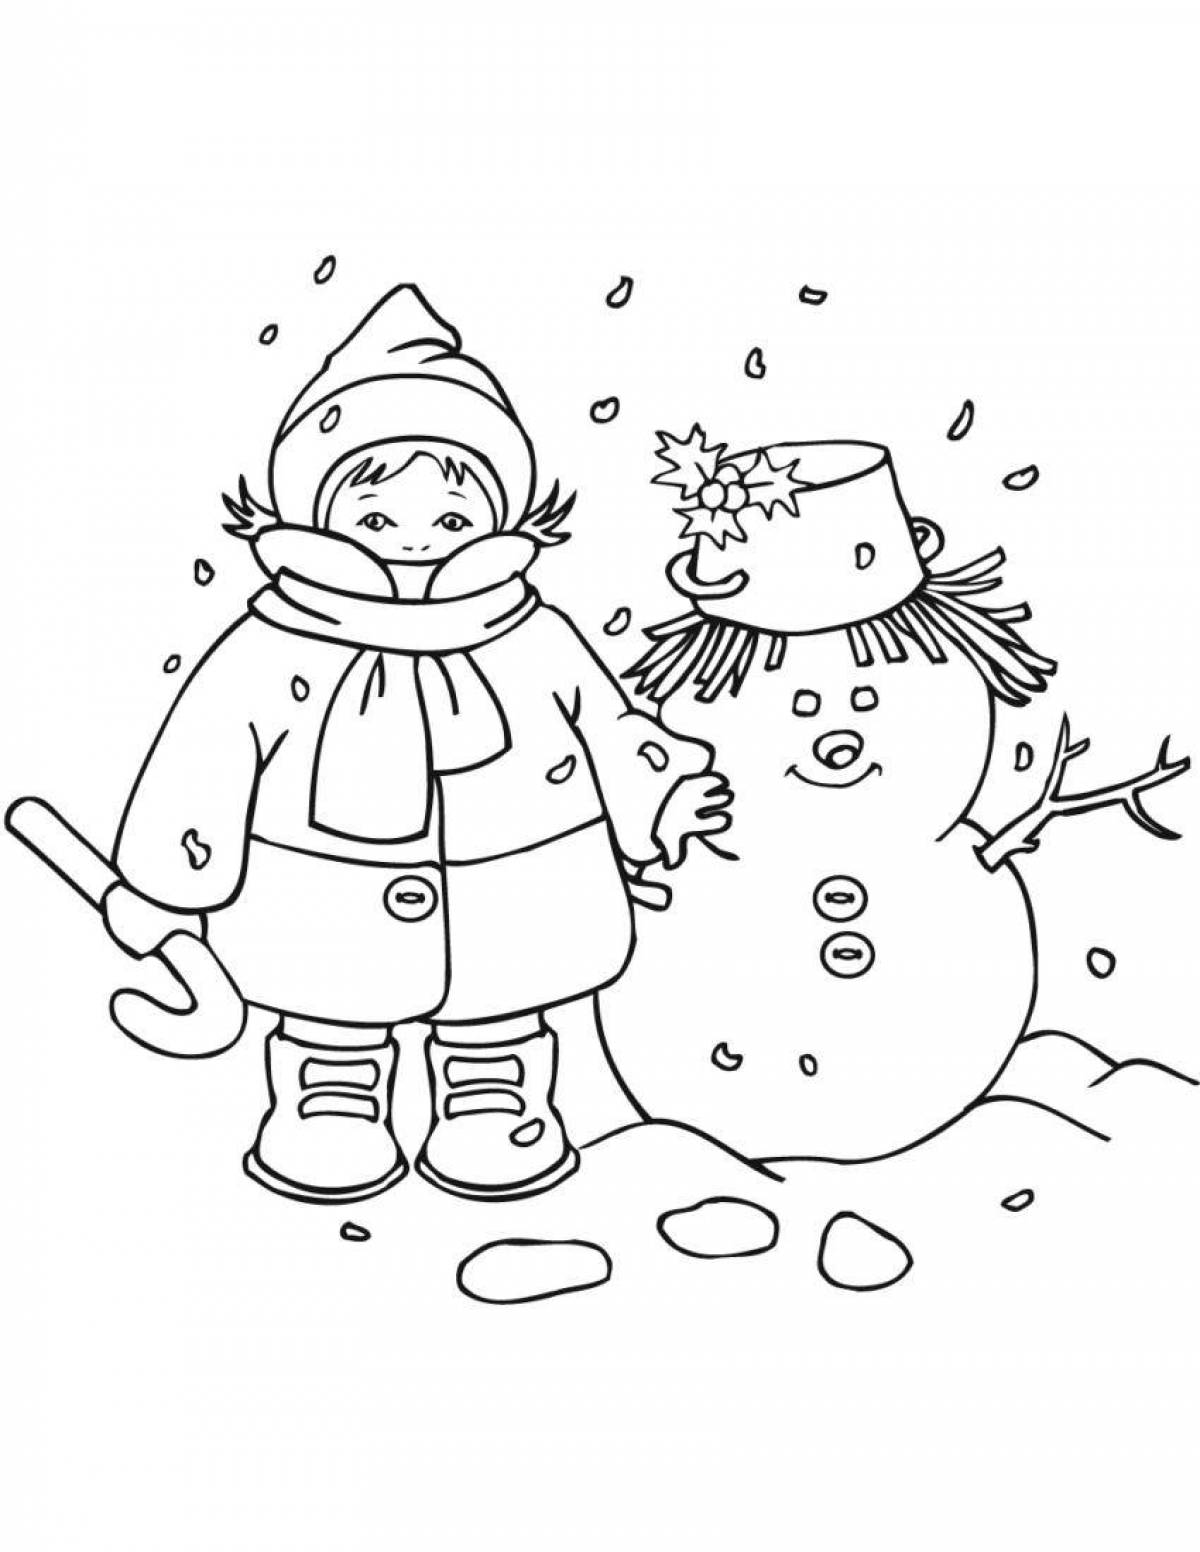 Exotic winter coloring book for boys